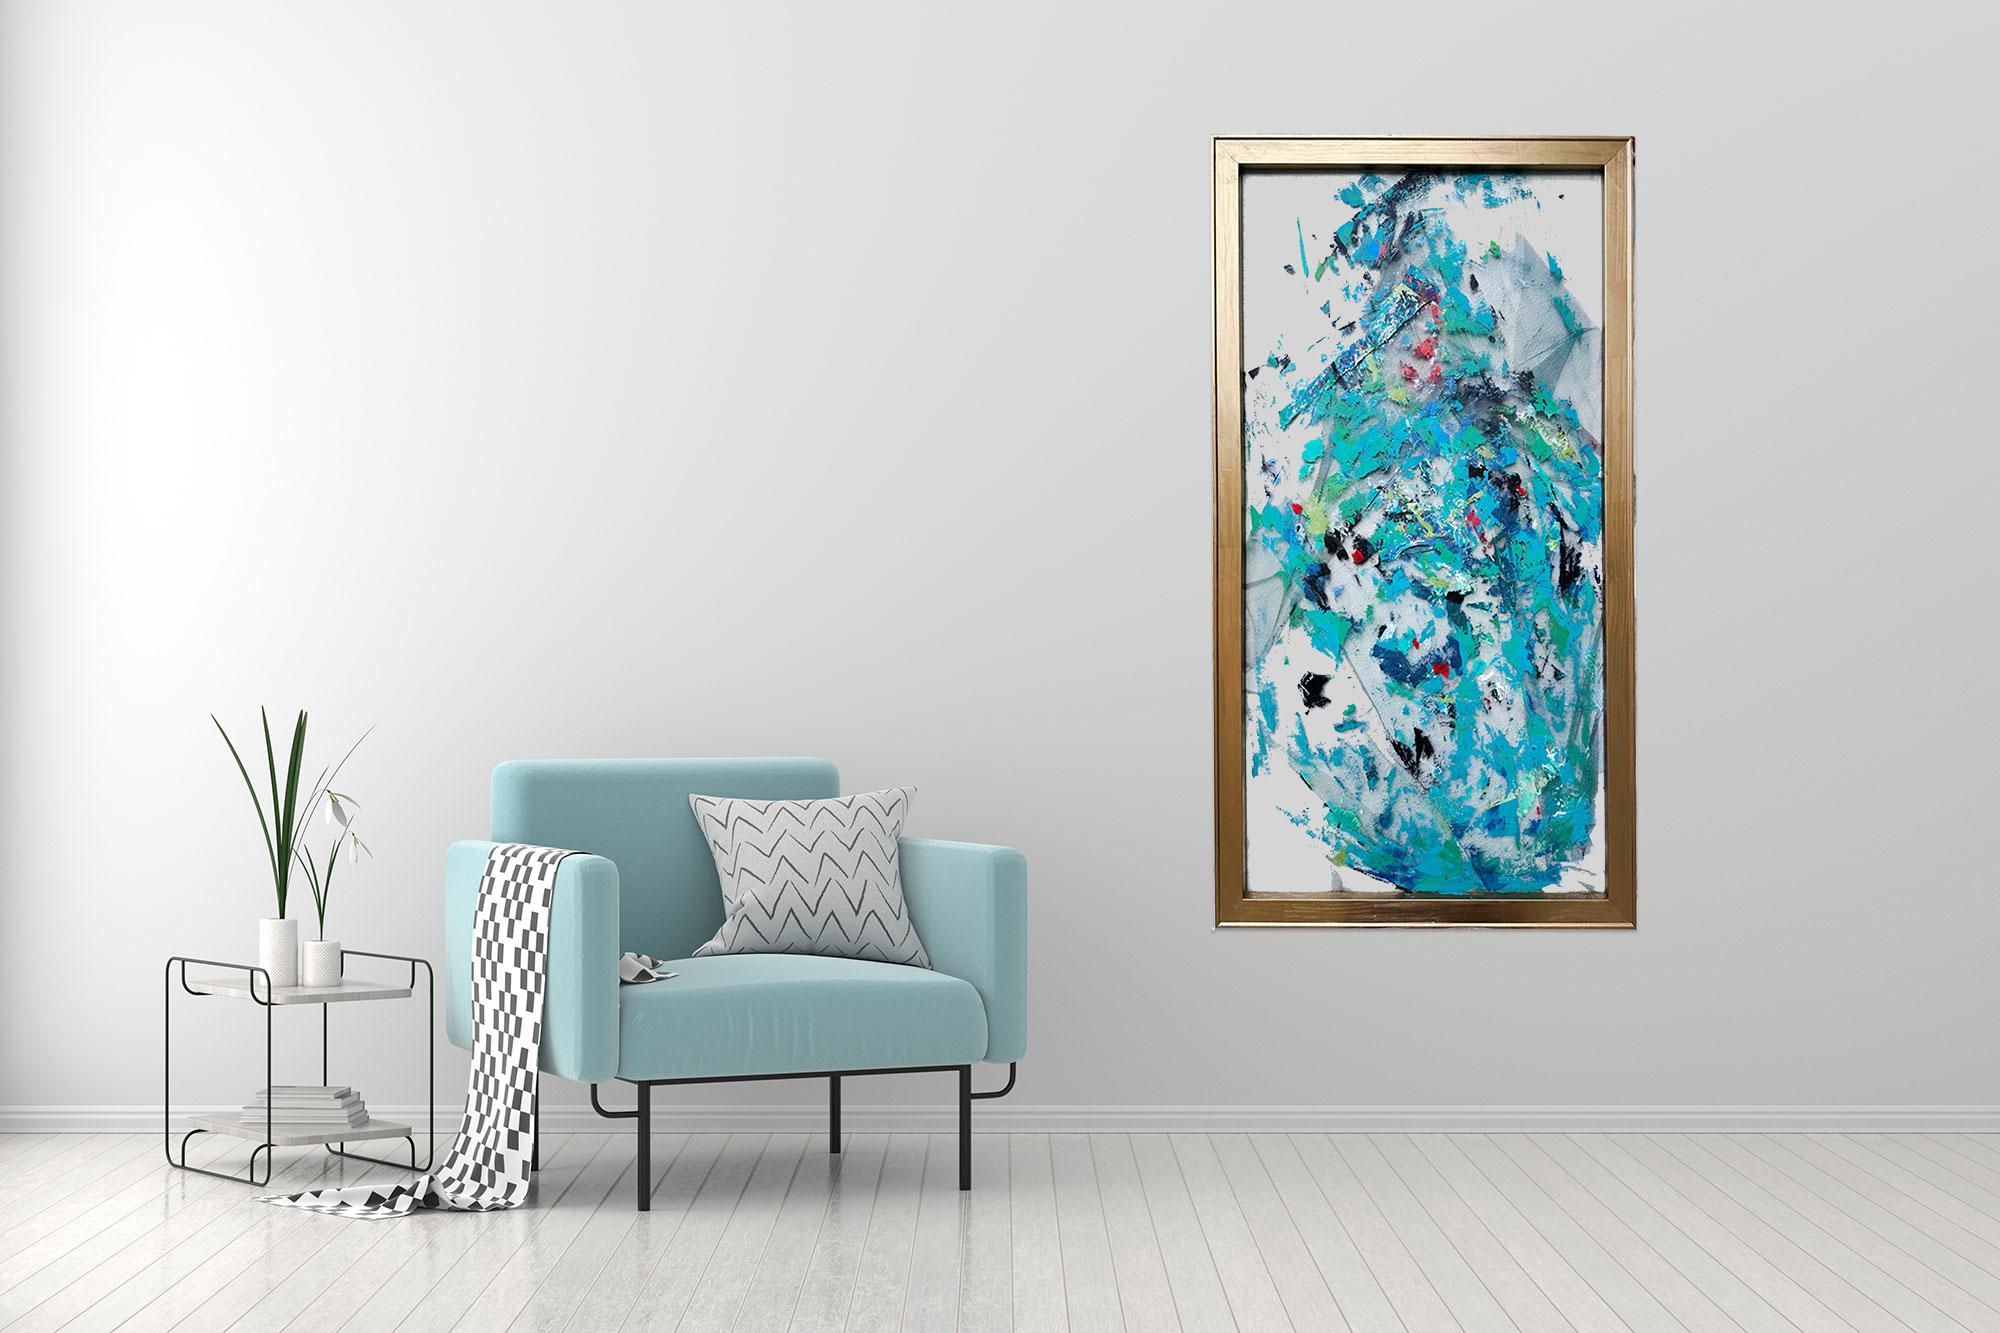 Motion - Oya Bolgun - Abstract Painting - Mixed Media For Sale 1